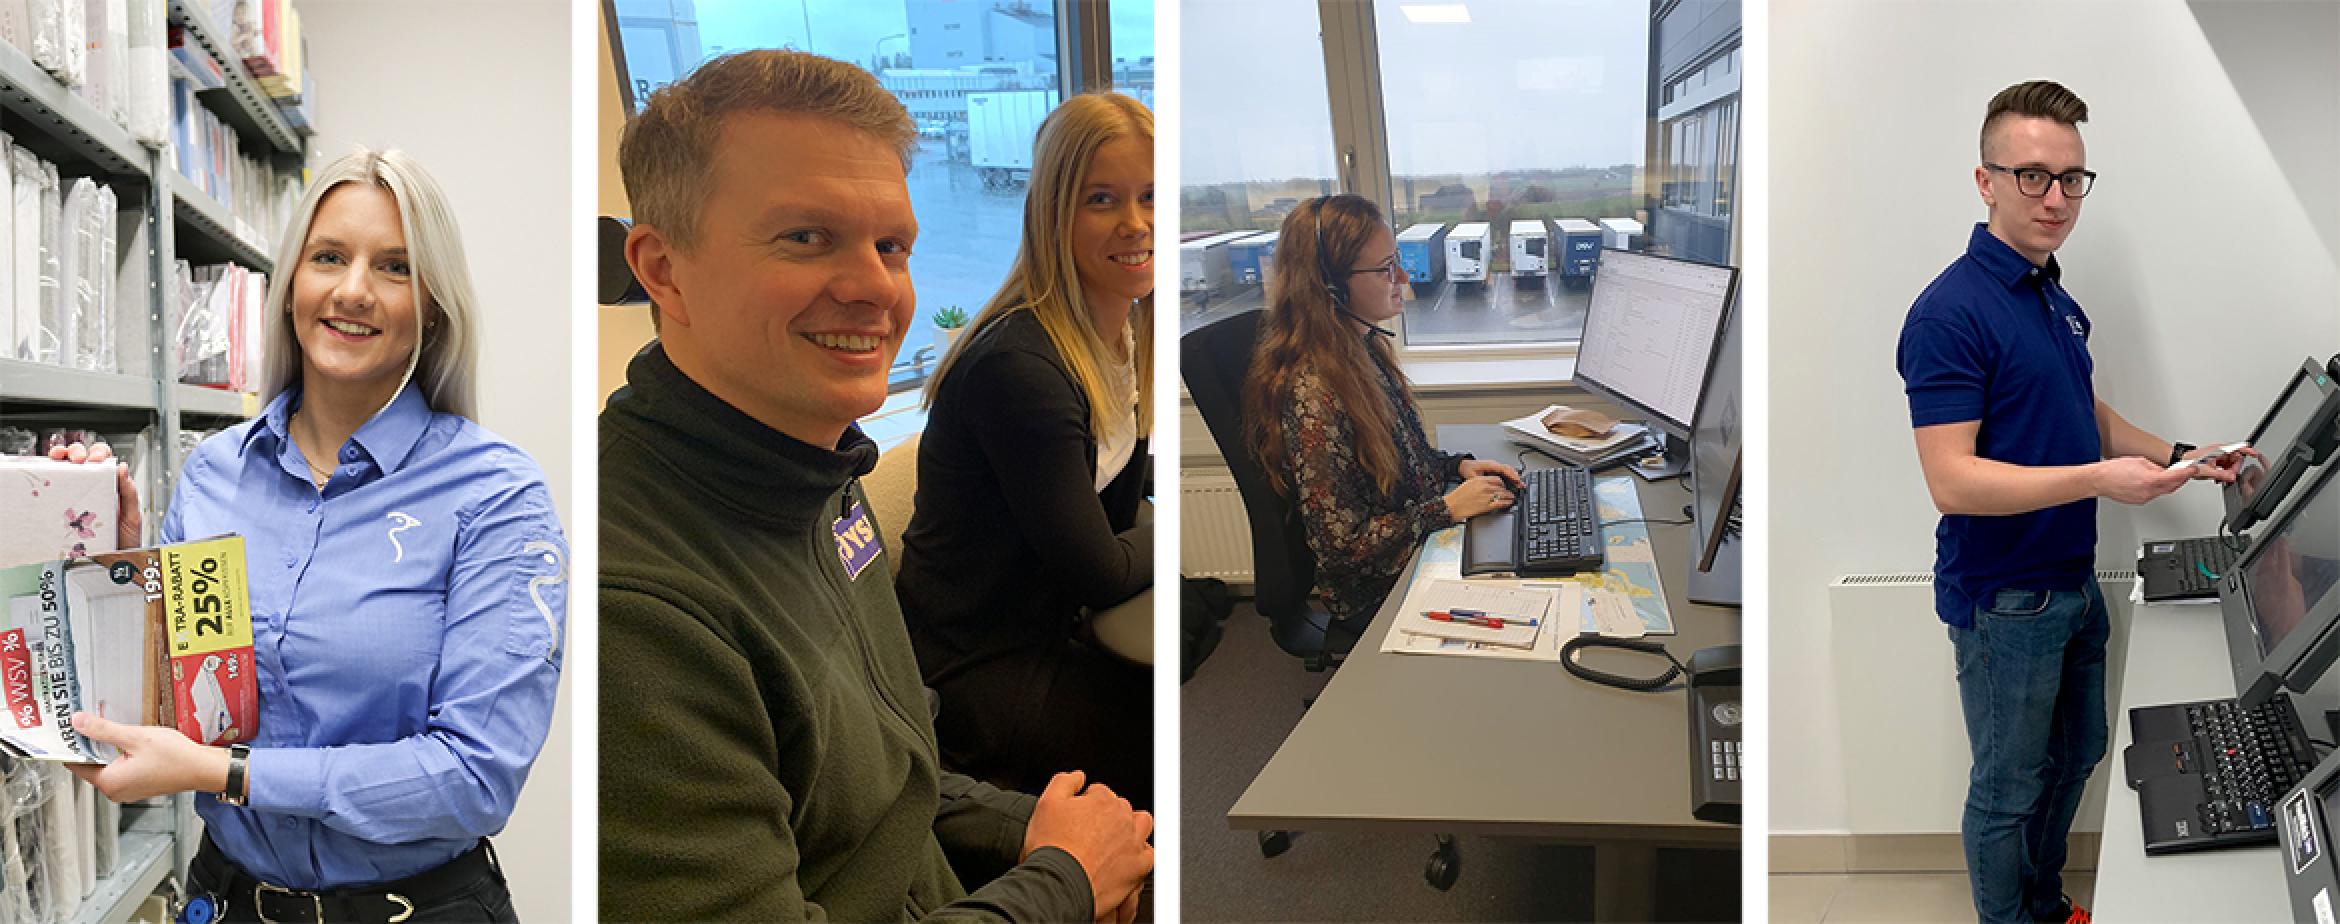 One Day in JYSK - four colleagues share their workday (February 2020)